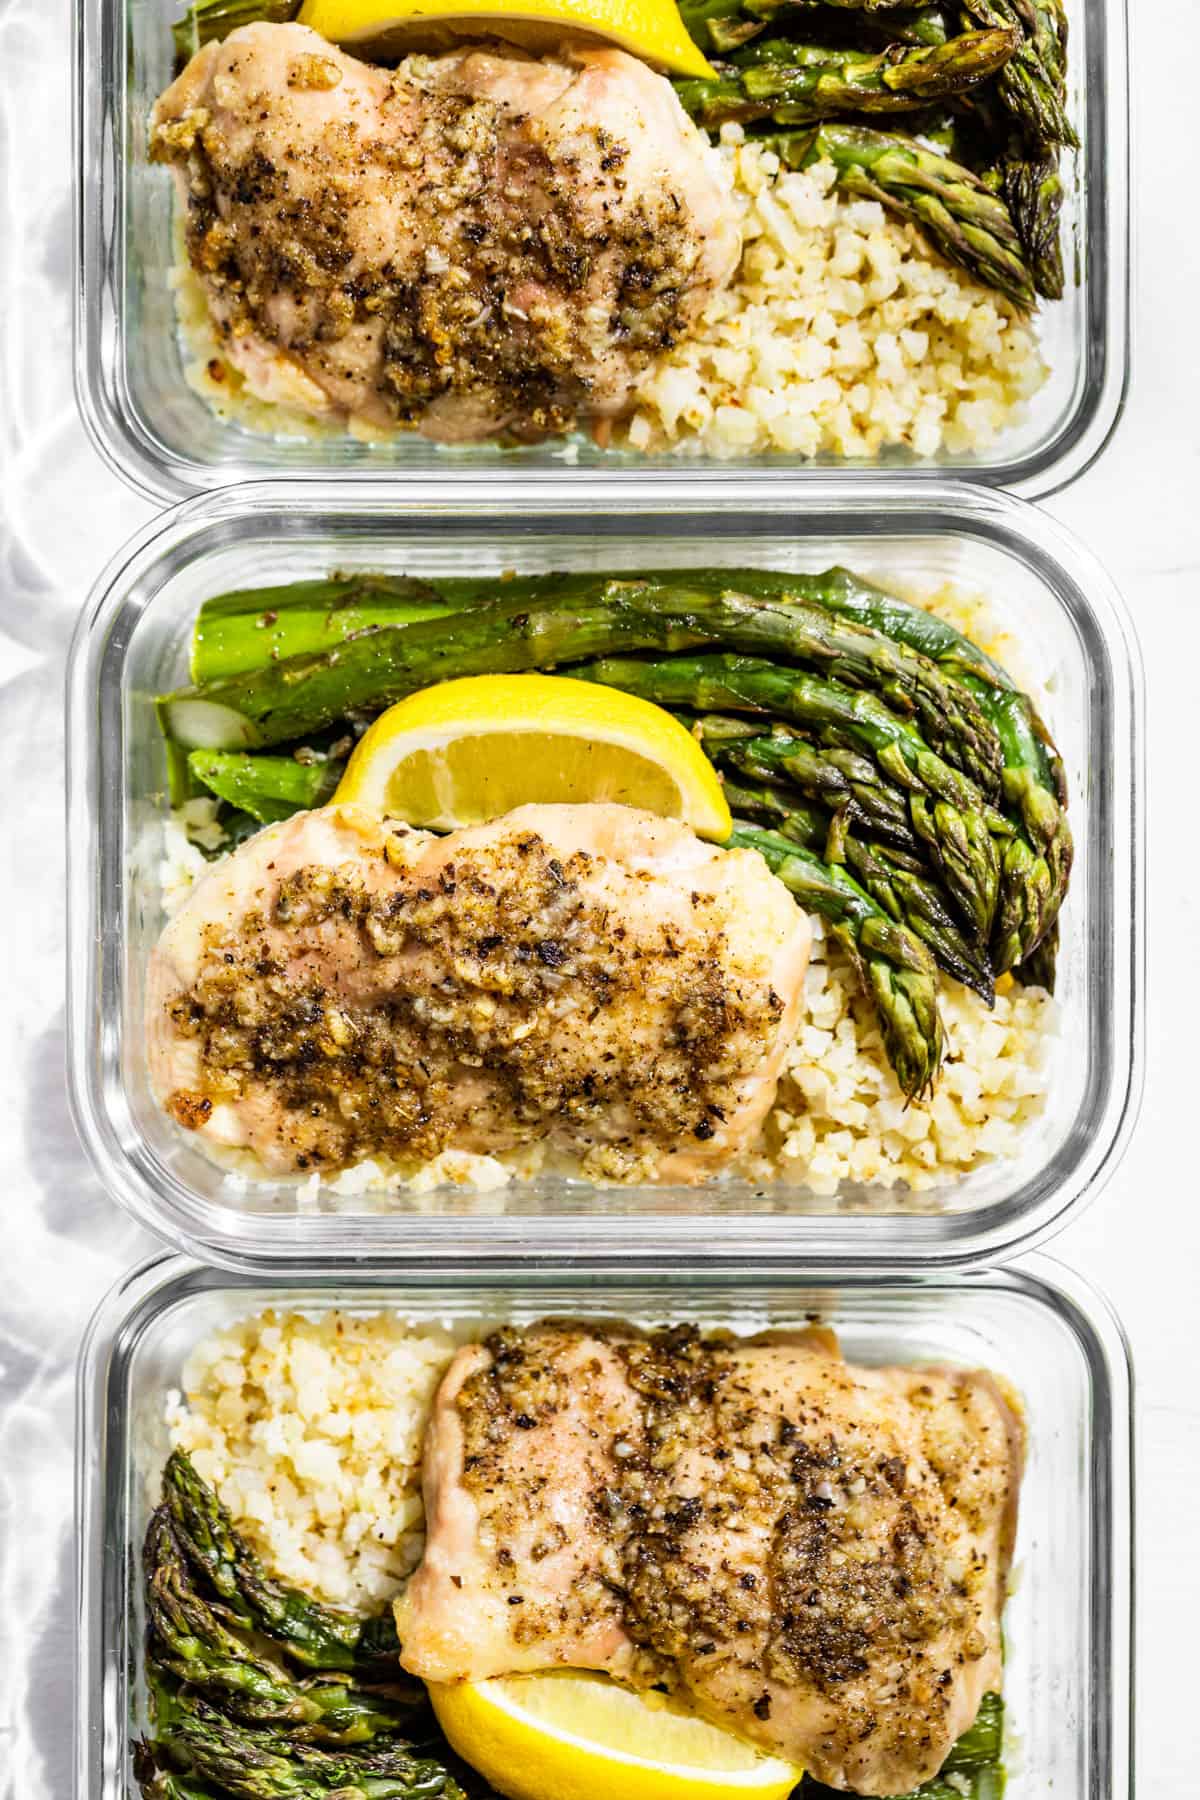 Straight down view of the Garlic Herb Chicken and Asparagus in three glass containers.